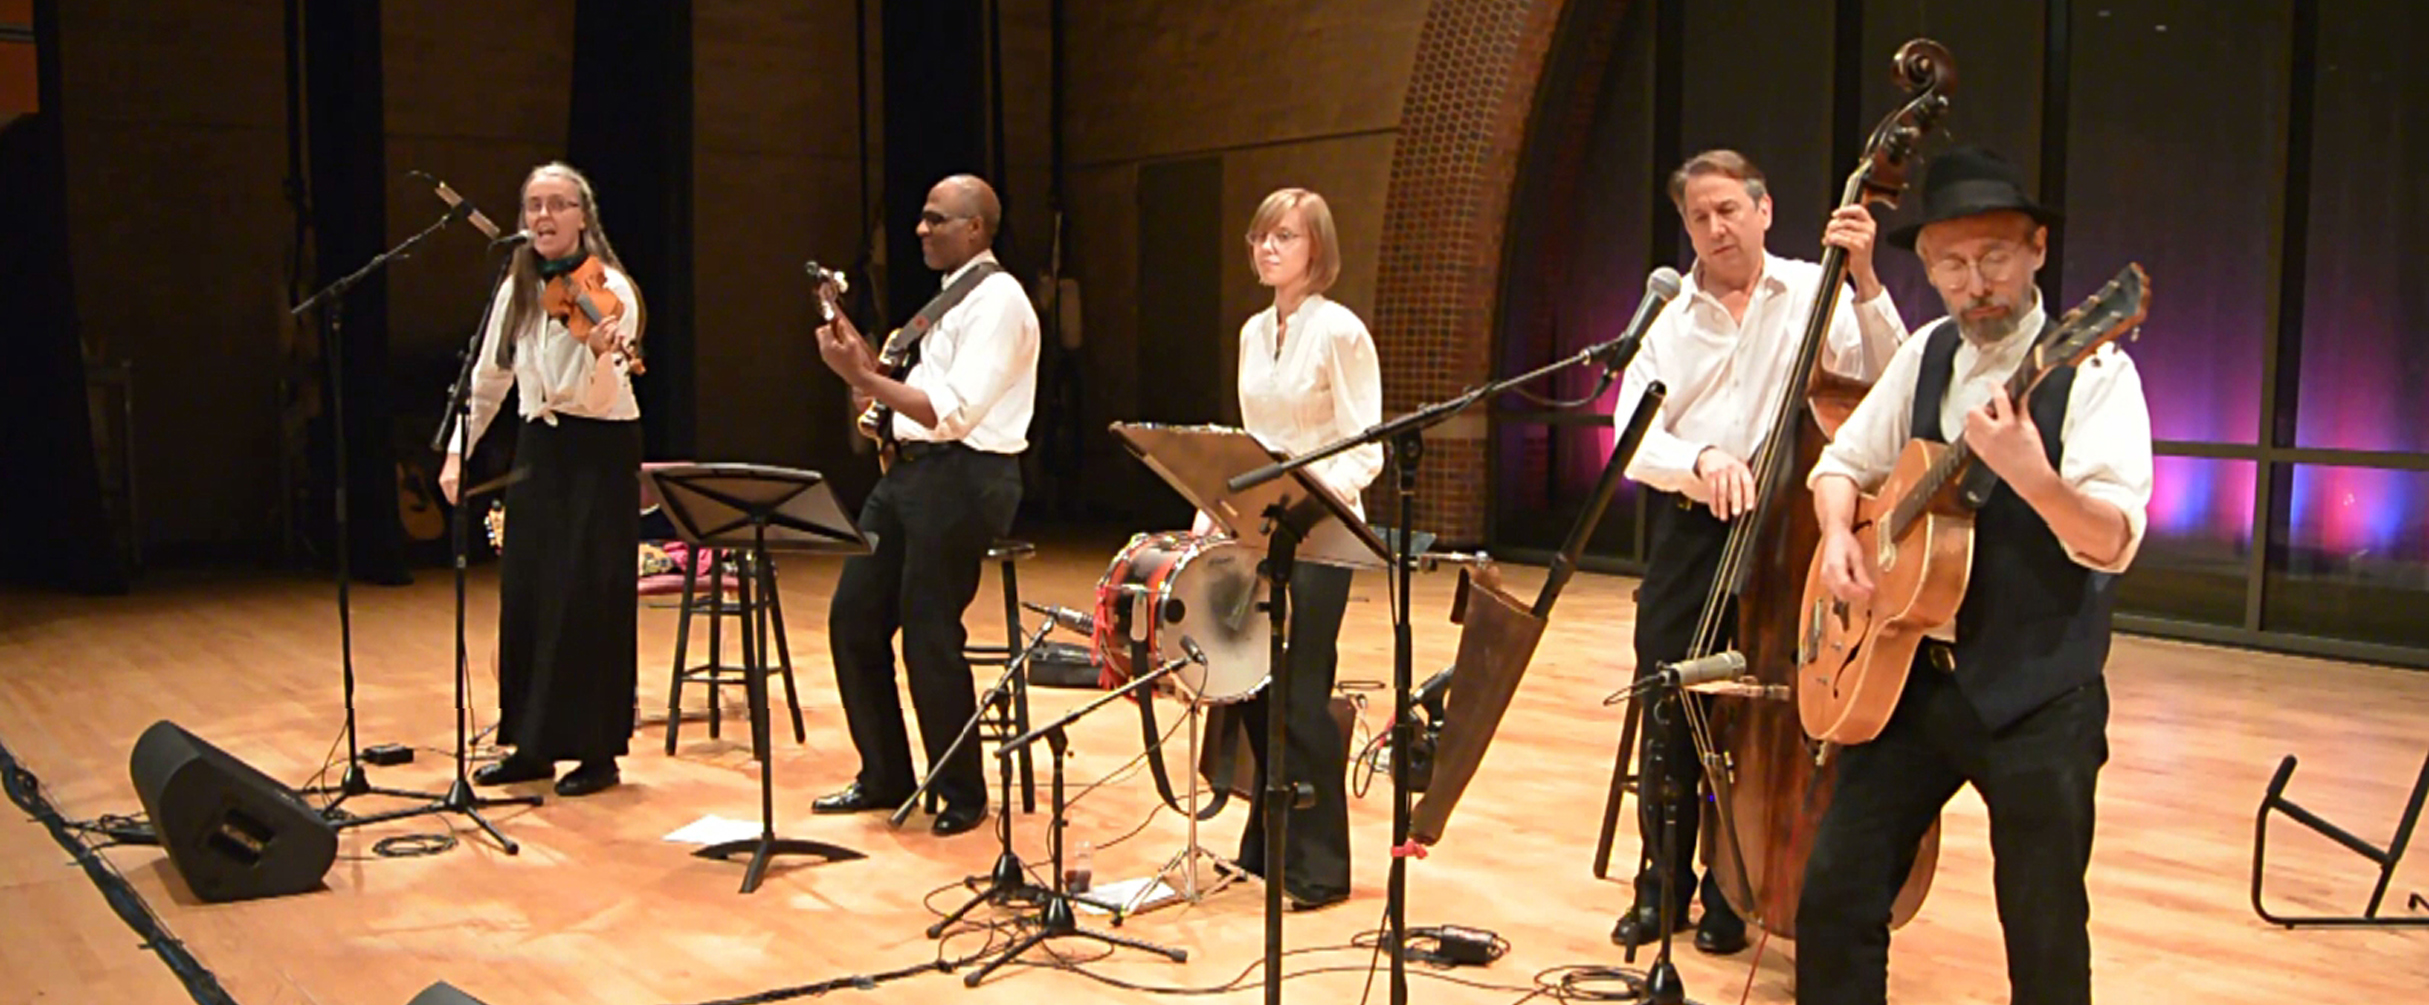 Click for more information on our concert and festival programs. Pictured - Hi-Dukes performing in concert as a quintet at the University of St. Louis.